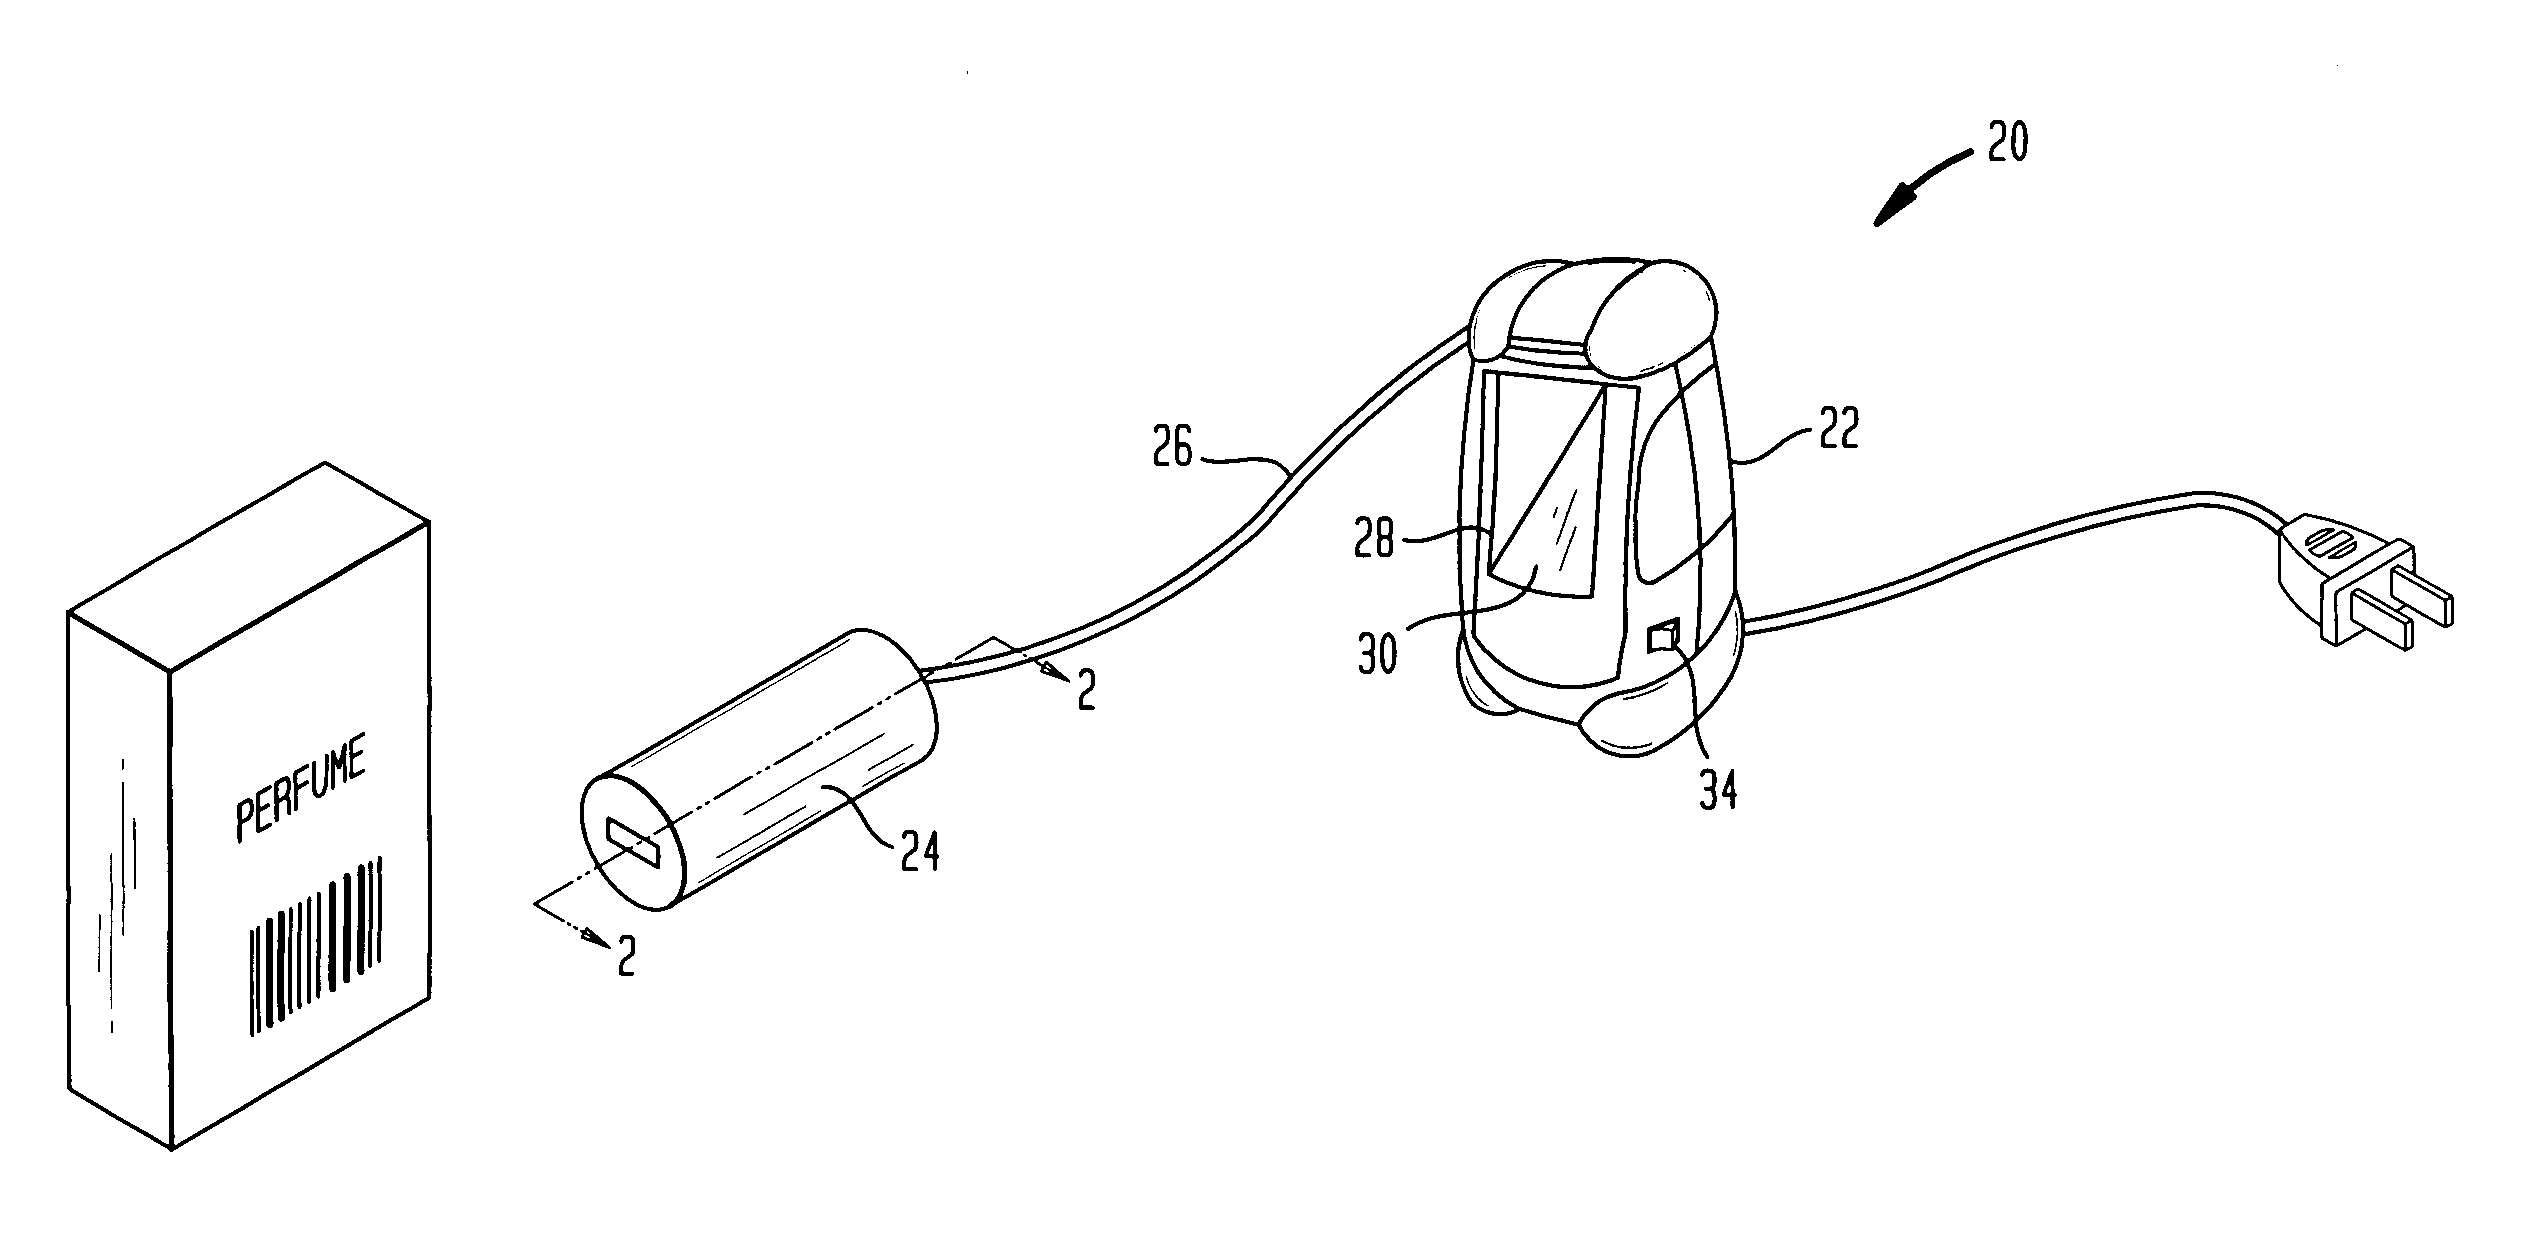 Portable authentication device and method of authenticating products or product packaging